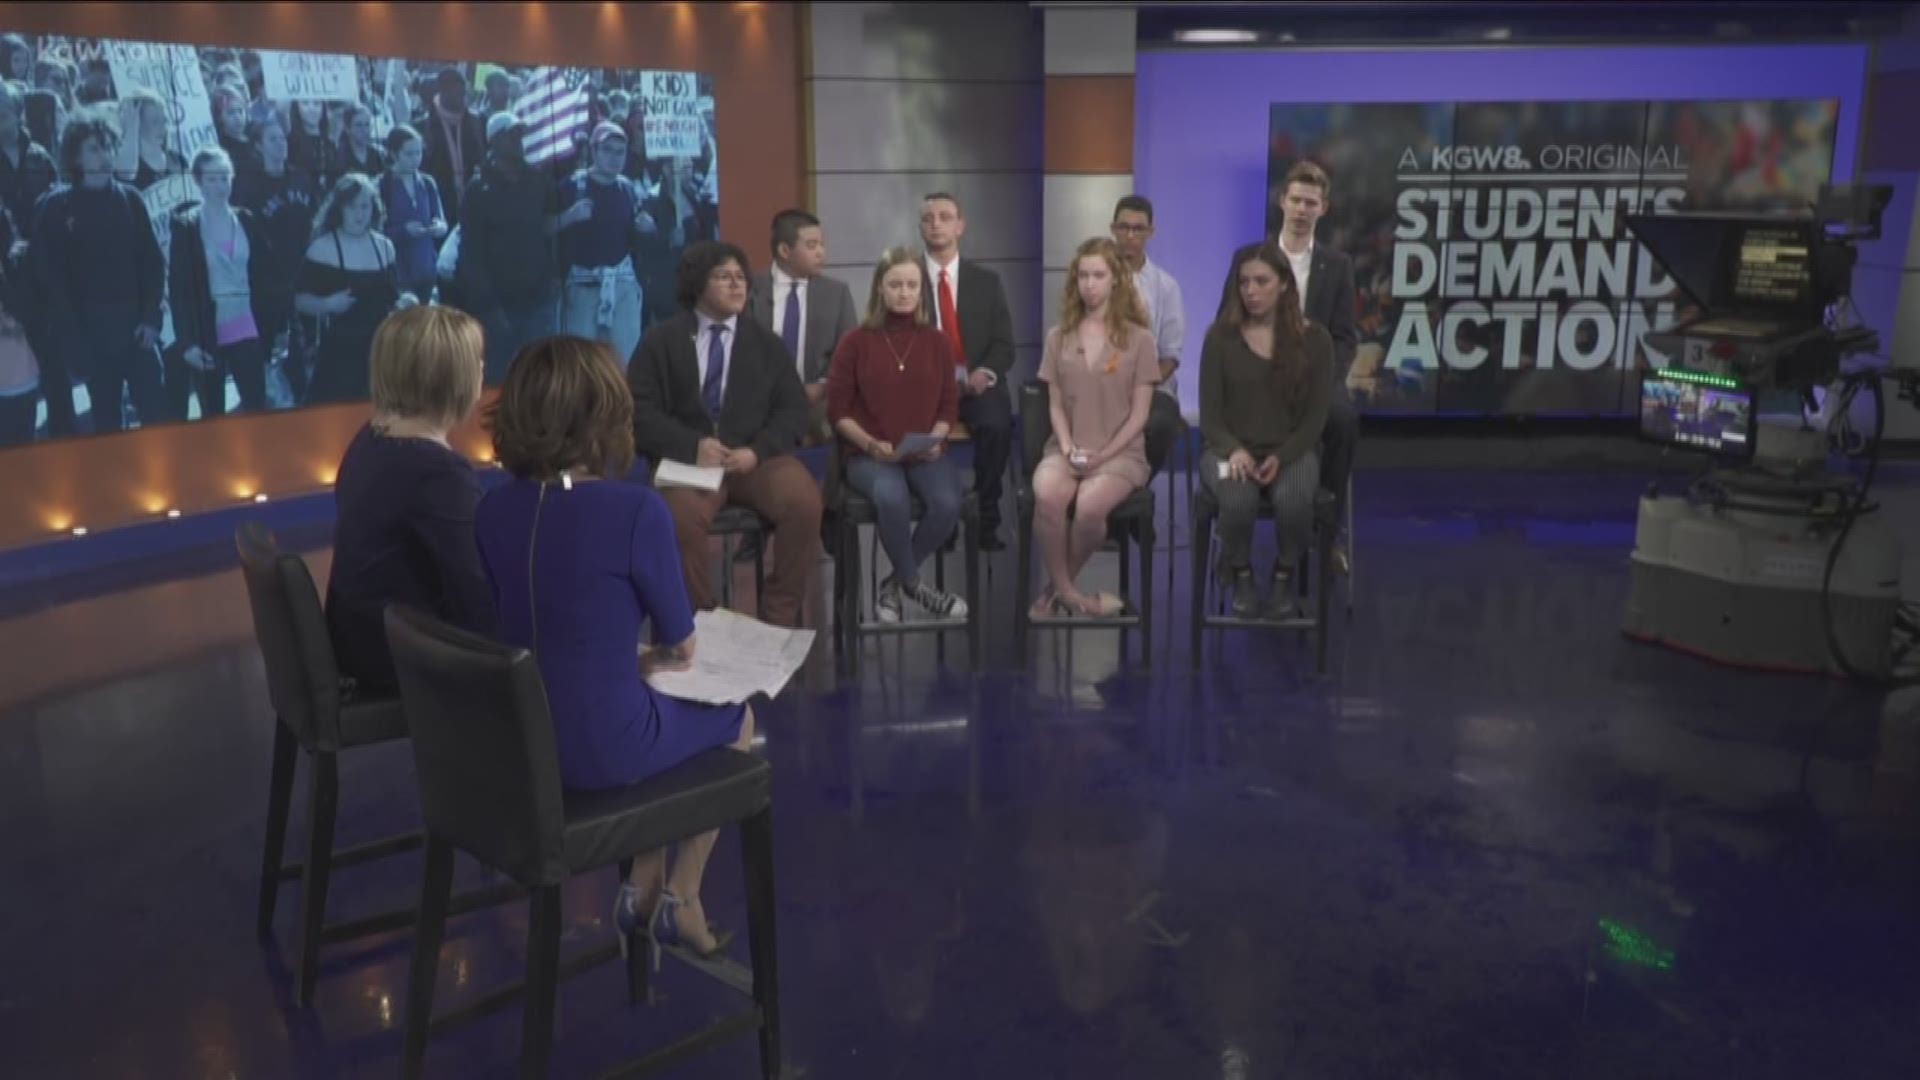 A panel of 8 students discuss whether they believe arming teachers would help make schools safer. This is part of the KGW special Students Demand Action.